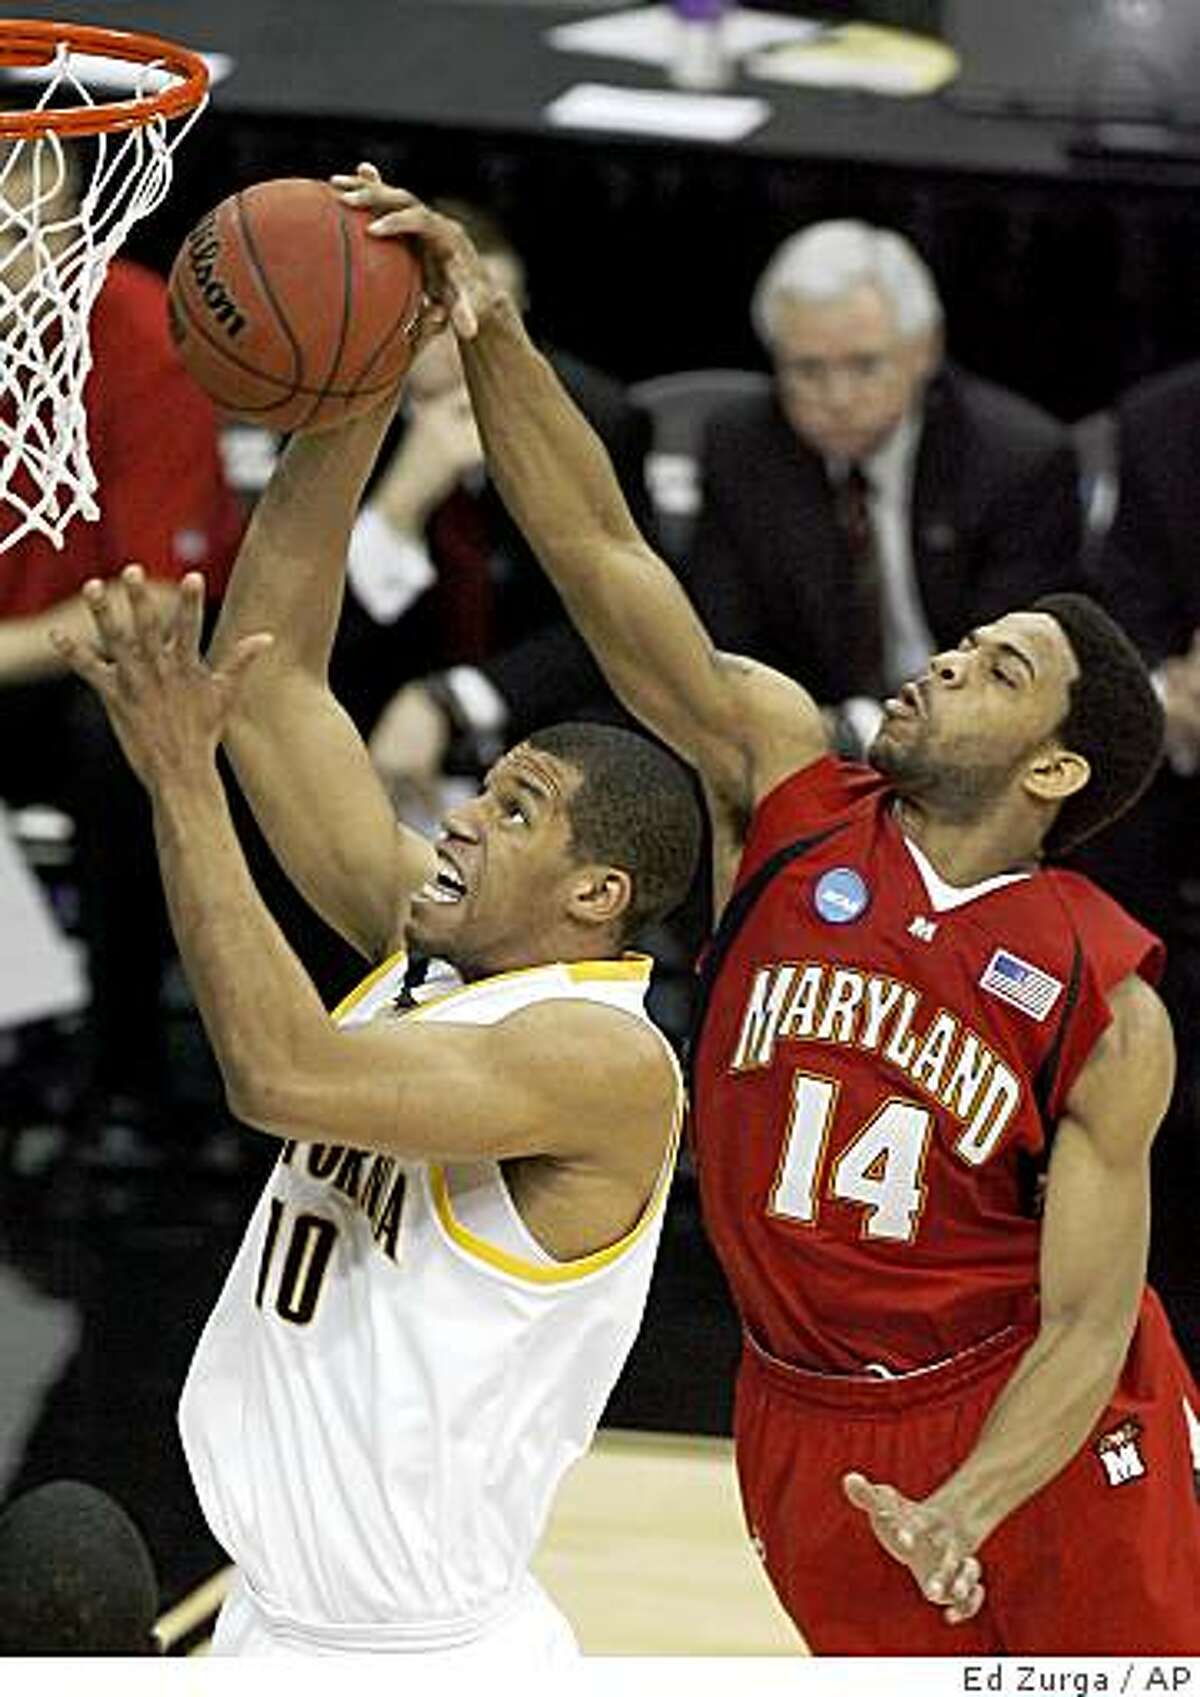 Maryland's Sean Mosley (14) gets a hand on the ball as California's Jamal Boykin (10) tries to make a shot in the first half during a first-round men's NCAA college basketball tournament game in Kansas City, Mo., Thursday, March 19, 2009.